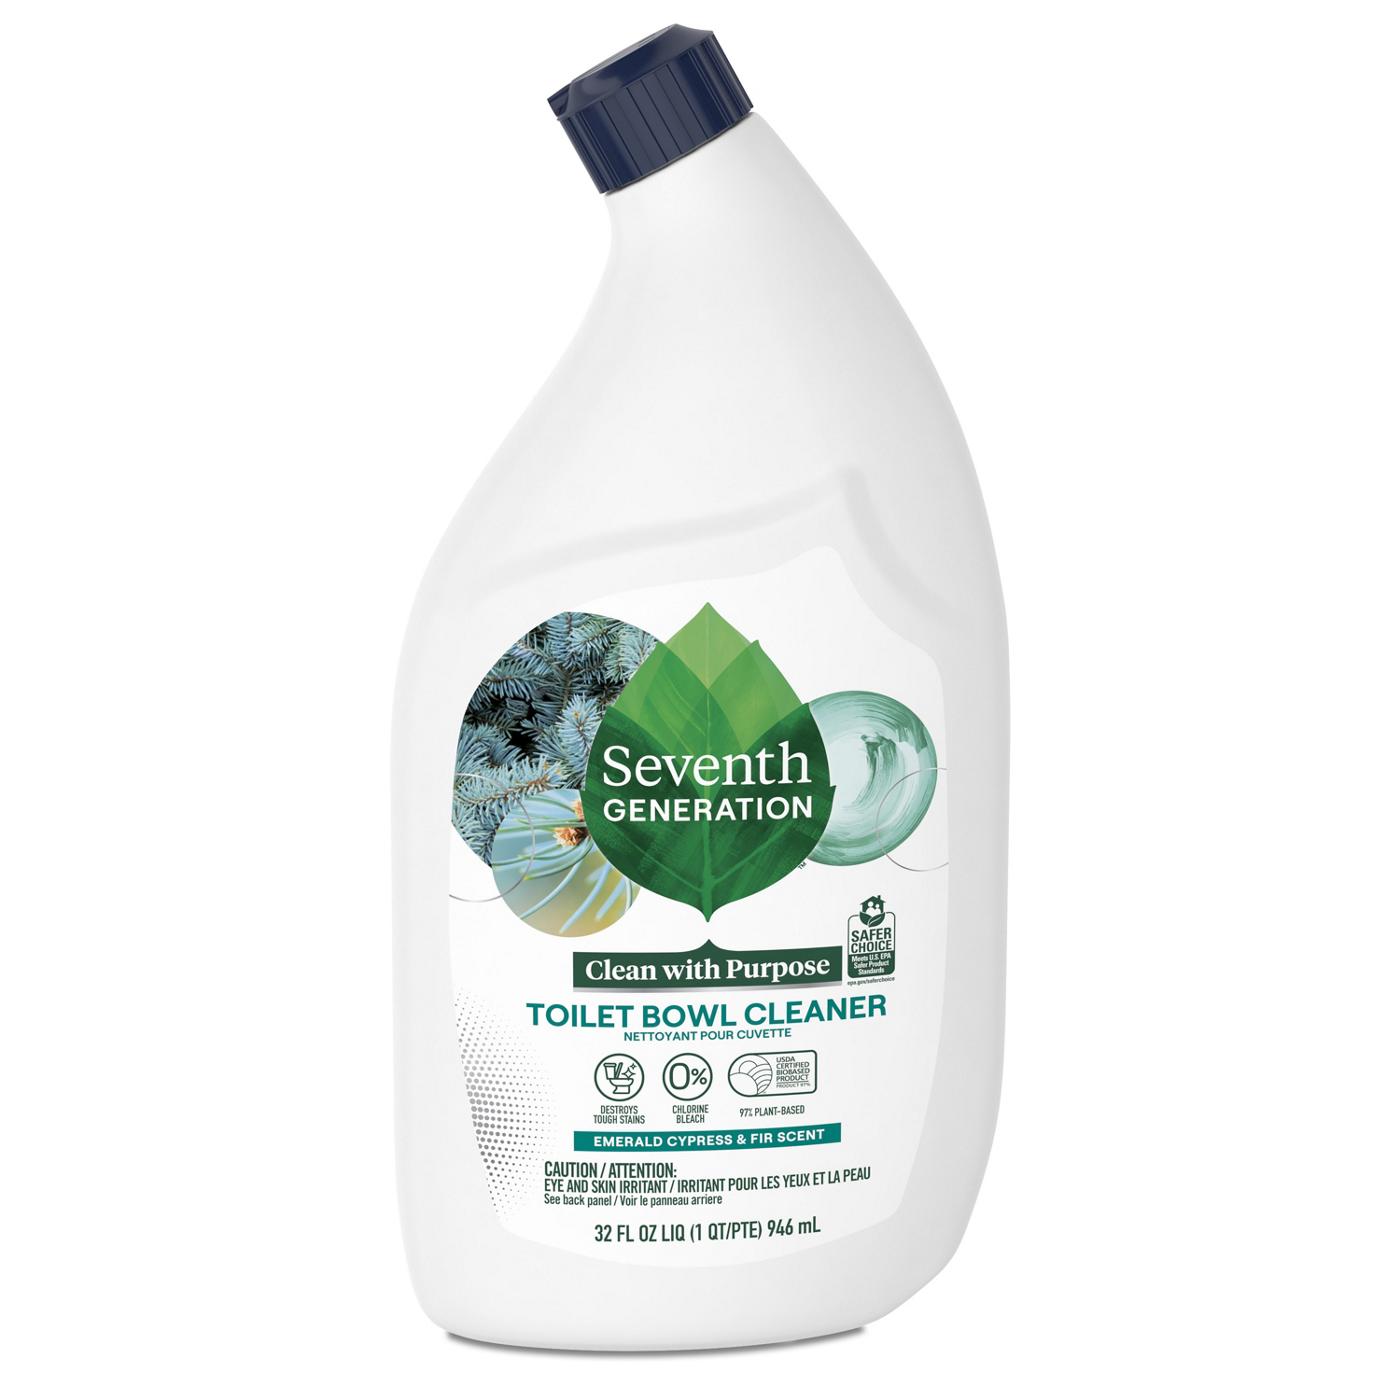 Seventh Generation Emerald Cypress & Fir Toilet Bowl Cleaner; image 1 of 7